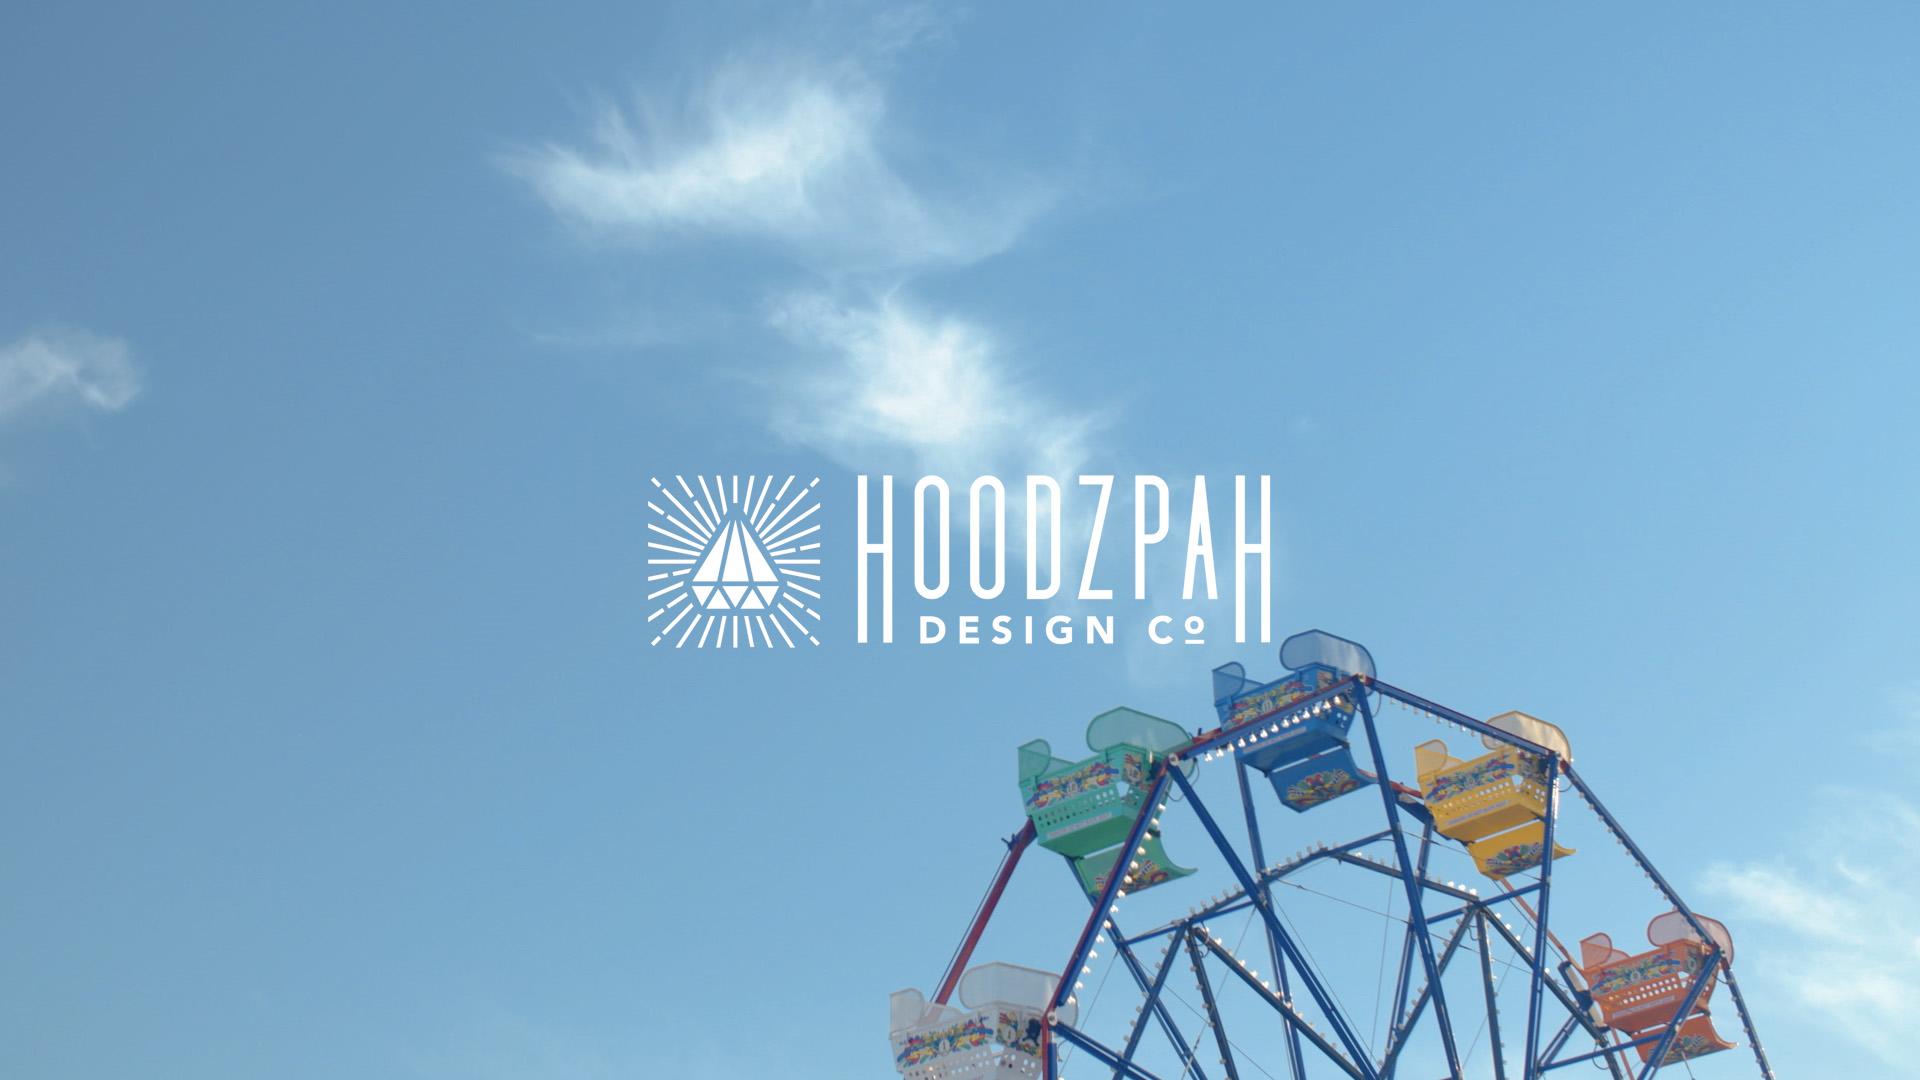 Company About Video for Hoodzpah design studio by Voda Films, a southern California production company